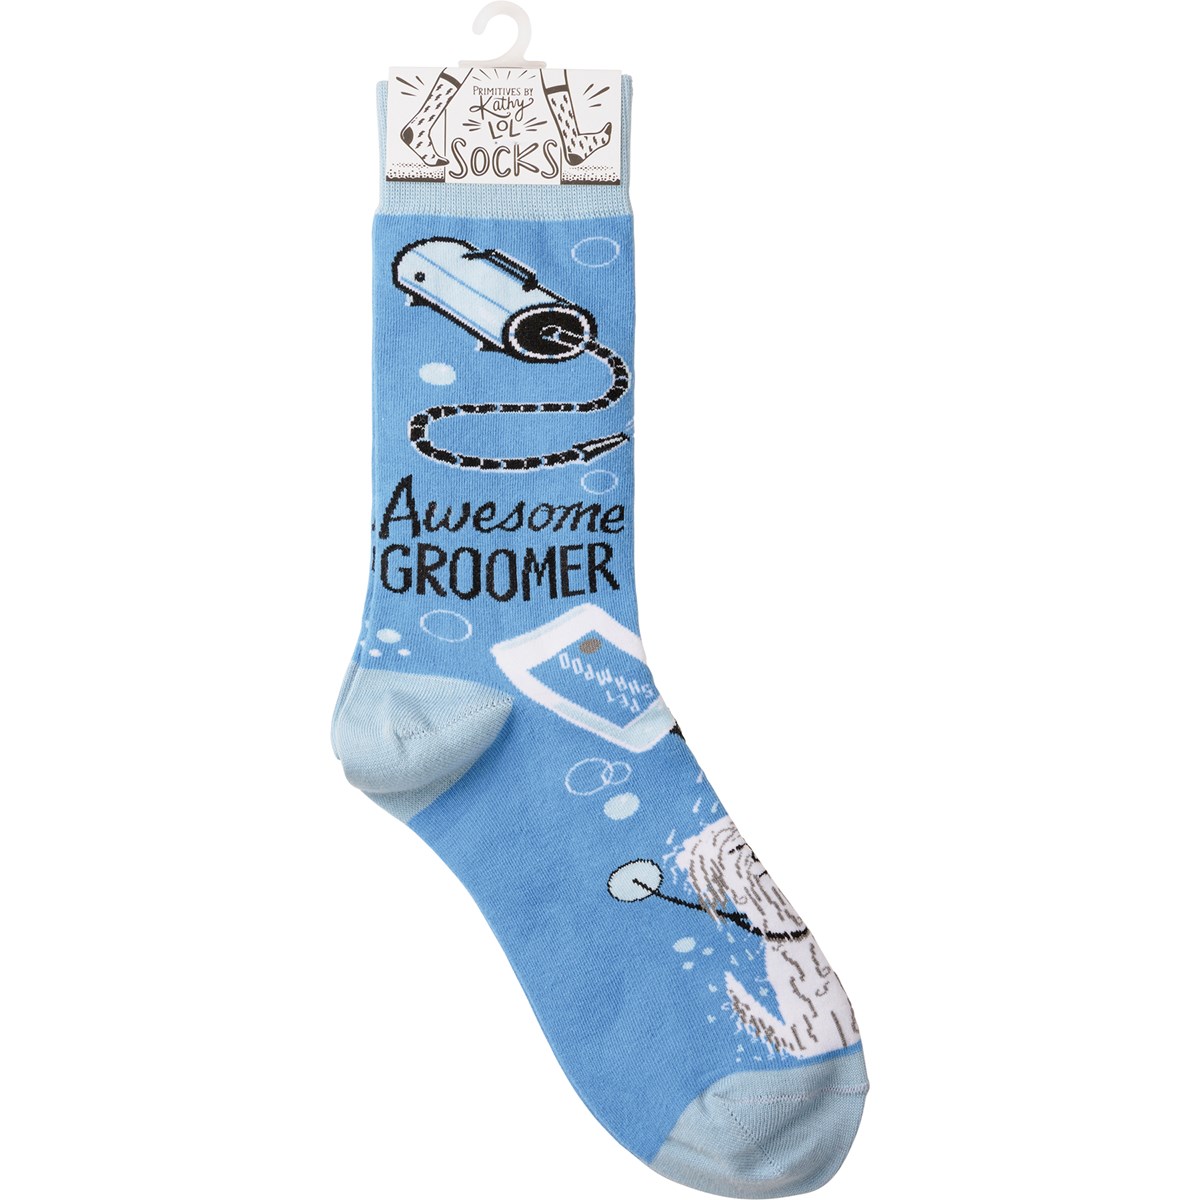 Socks - Awesome Groomer - One Size Fits Most - Cotton, Nylon, Spandex